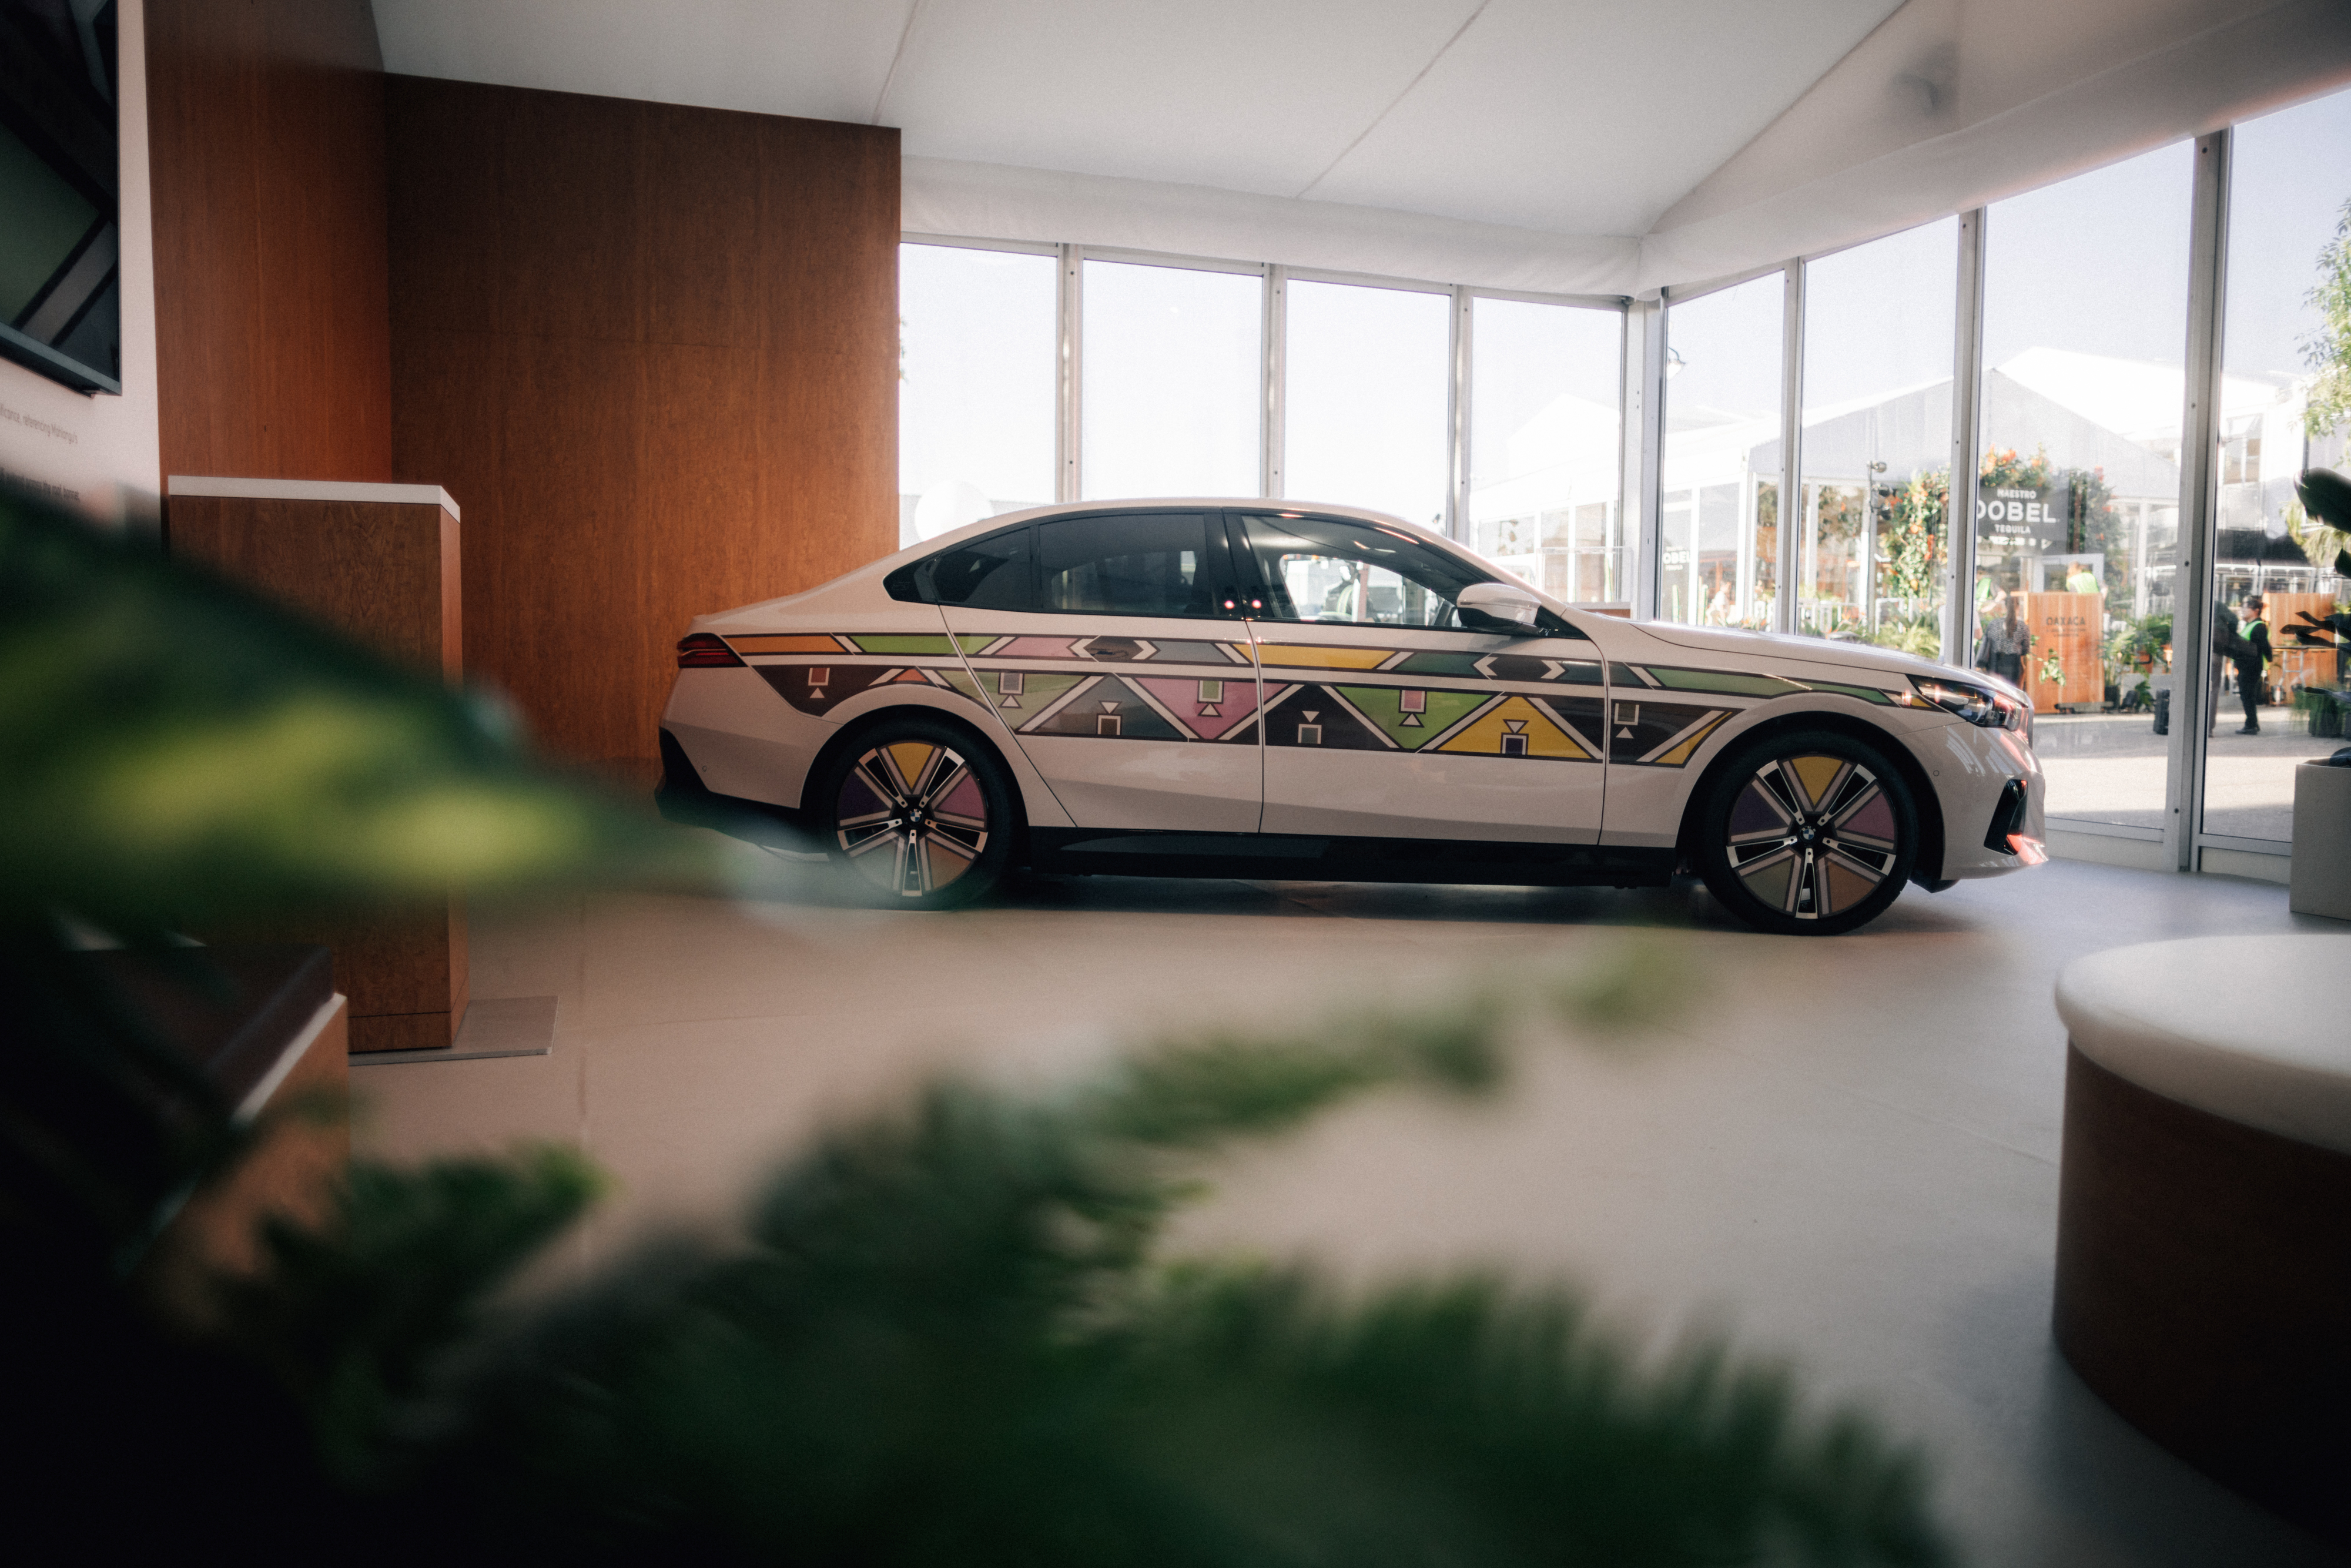 A car with a geometric pattern design parked inside a modern building